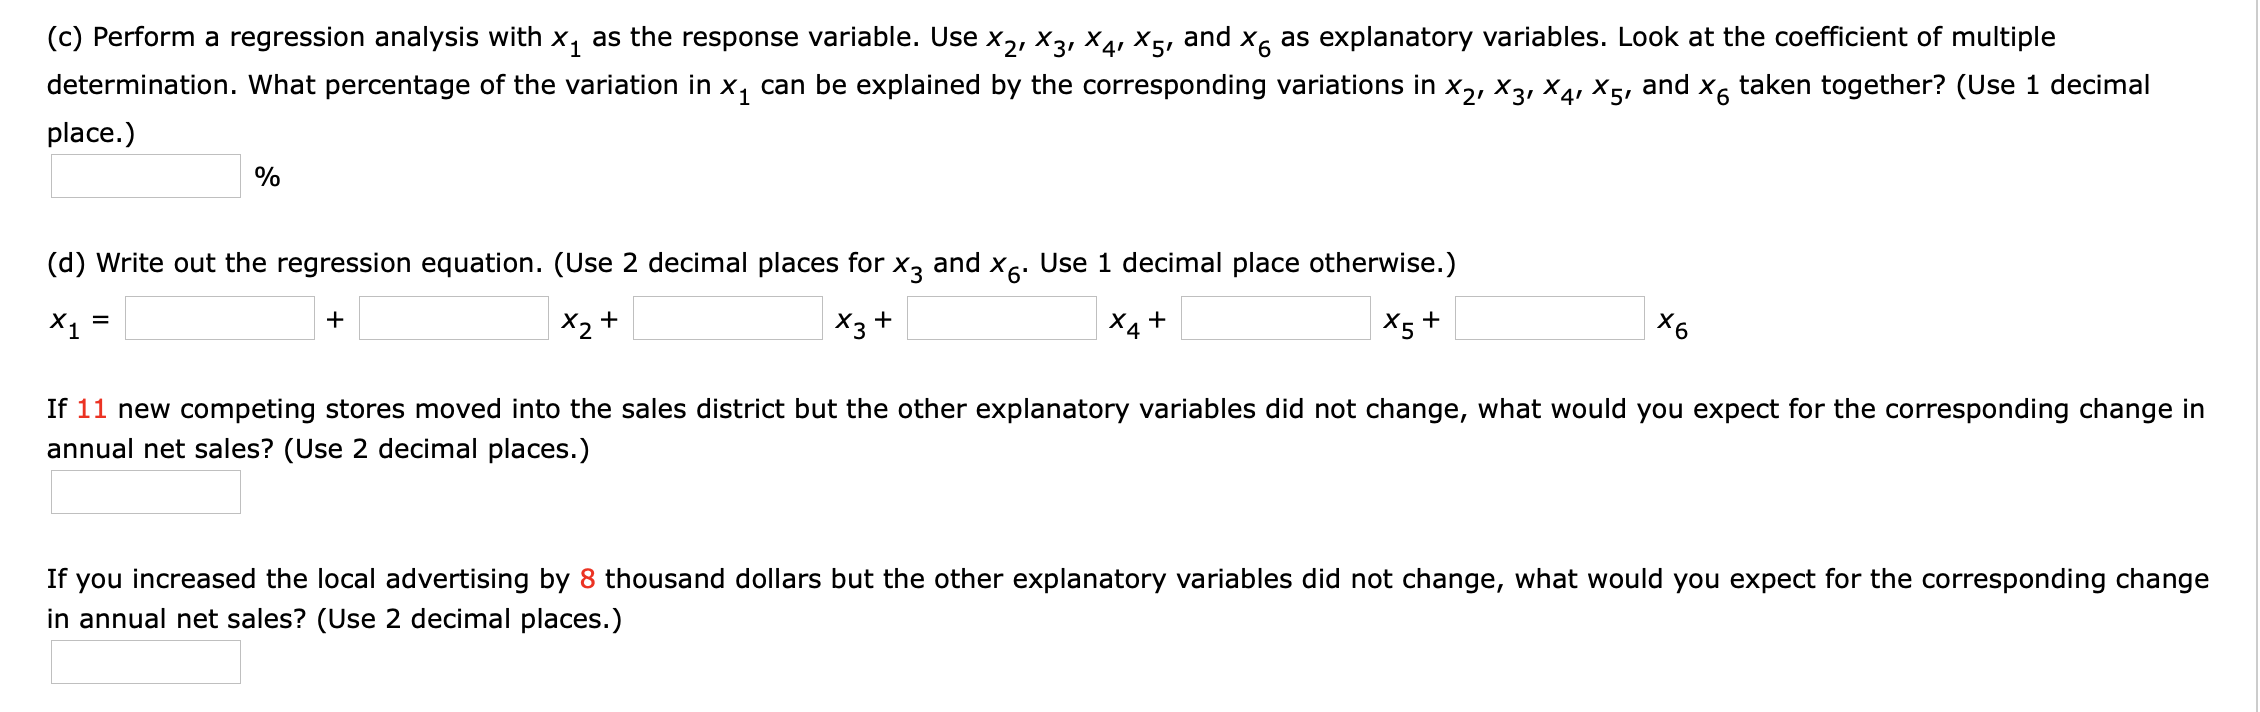 (c) Perform a regression analysis with x, as the response variable. Use x,, X3, X4, X5, and x, as explanatory variables. Look at the coefficient of multiple
determination. What percentage of the variation in x, can be explained by the corresponding variations in x2, X3, X4, X5,
place.)
and
X6
taken together? (Use 1 decimal
(d) Write out the regression equation. (Use 2 decimal places for x, and X6. Use 1 decimal place otherwise.)
X1
X2+
X3+
X4 +
*5 +
X6
If 11 new competing stores moved into the sales district but the other explanatory variables did not change, what would you expect for the corresponding change in
annual net sales? (Use 2 decimal places.)
If you increased the local advertising by 8 thousand dollars but the other explanatory variables did not change, what would you expect for the corresponding change
in annual net sales? (Use 2 decimal places.)
